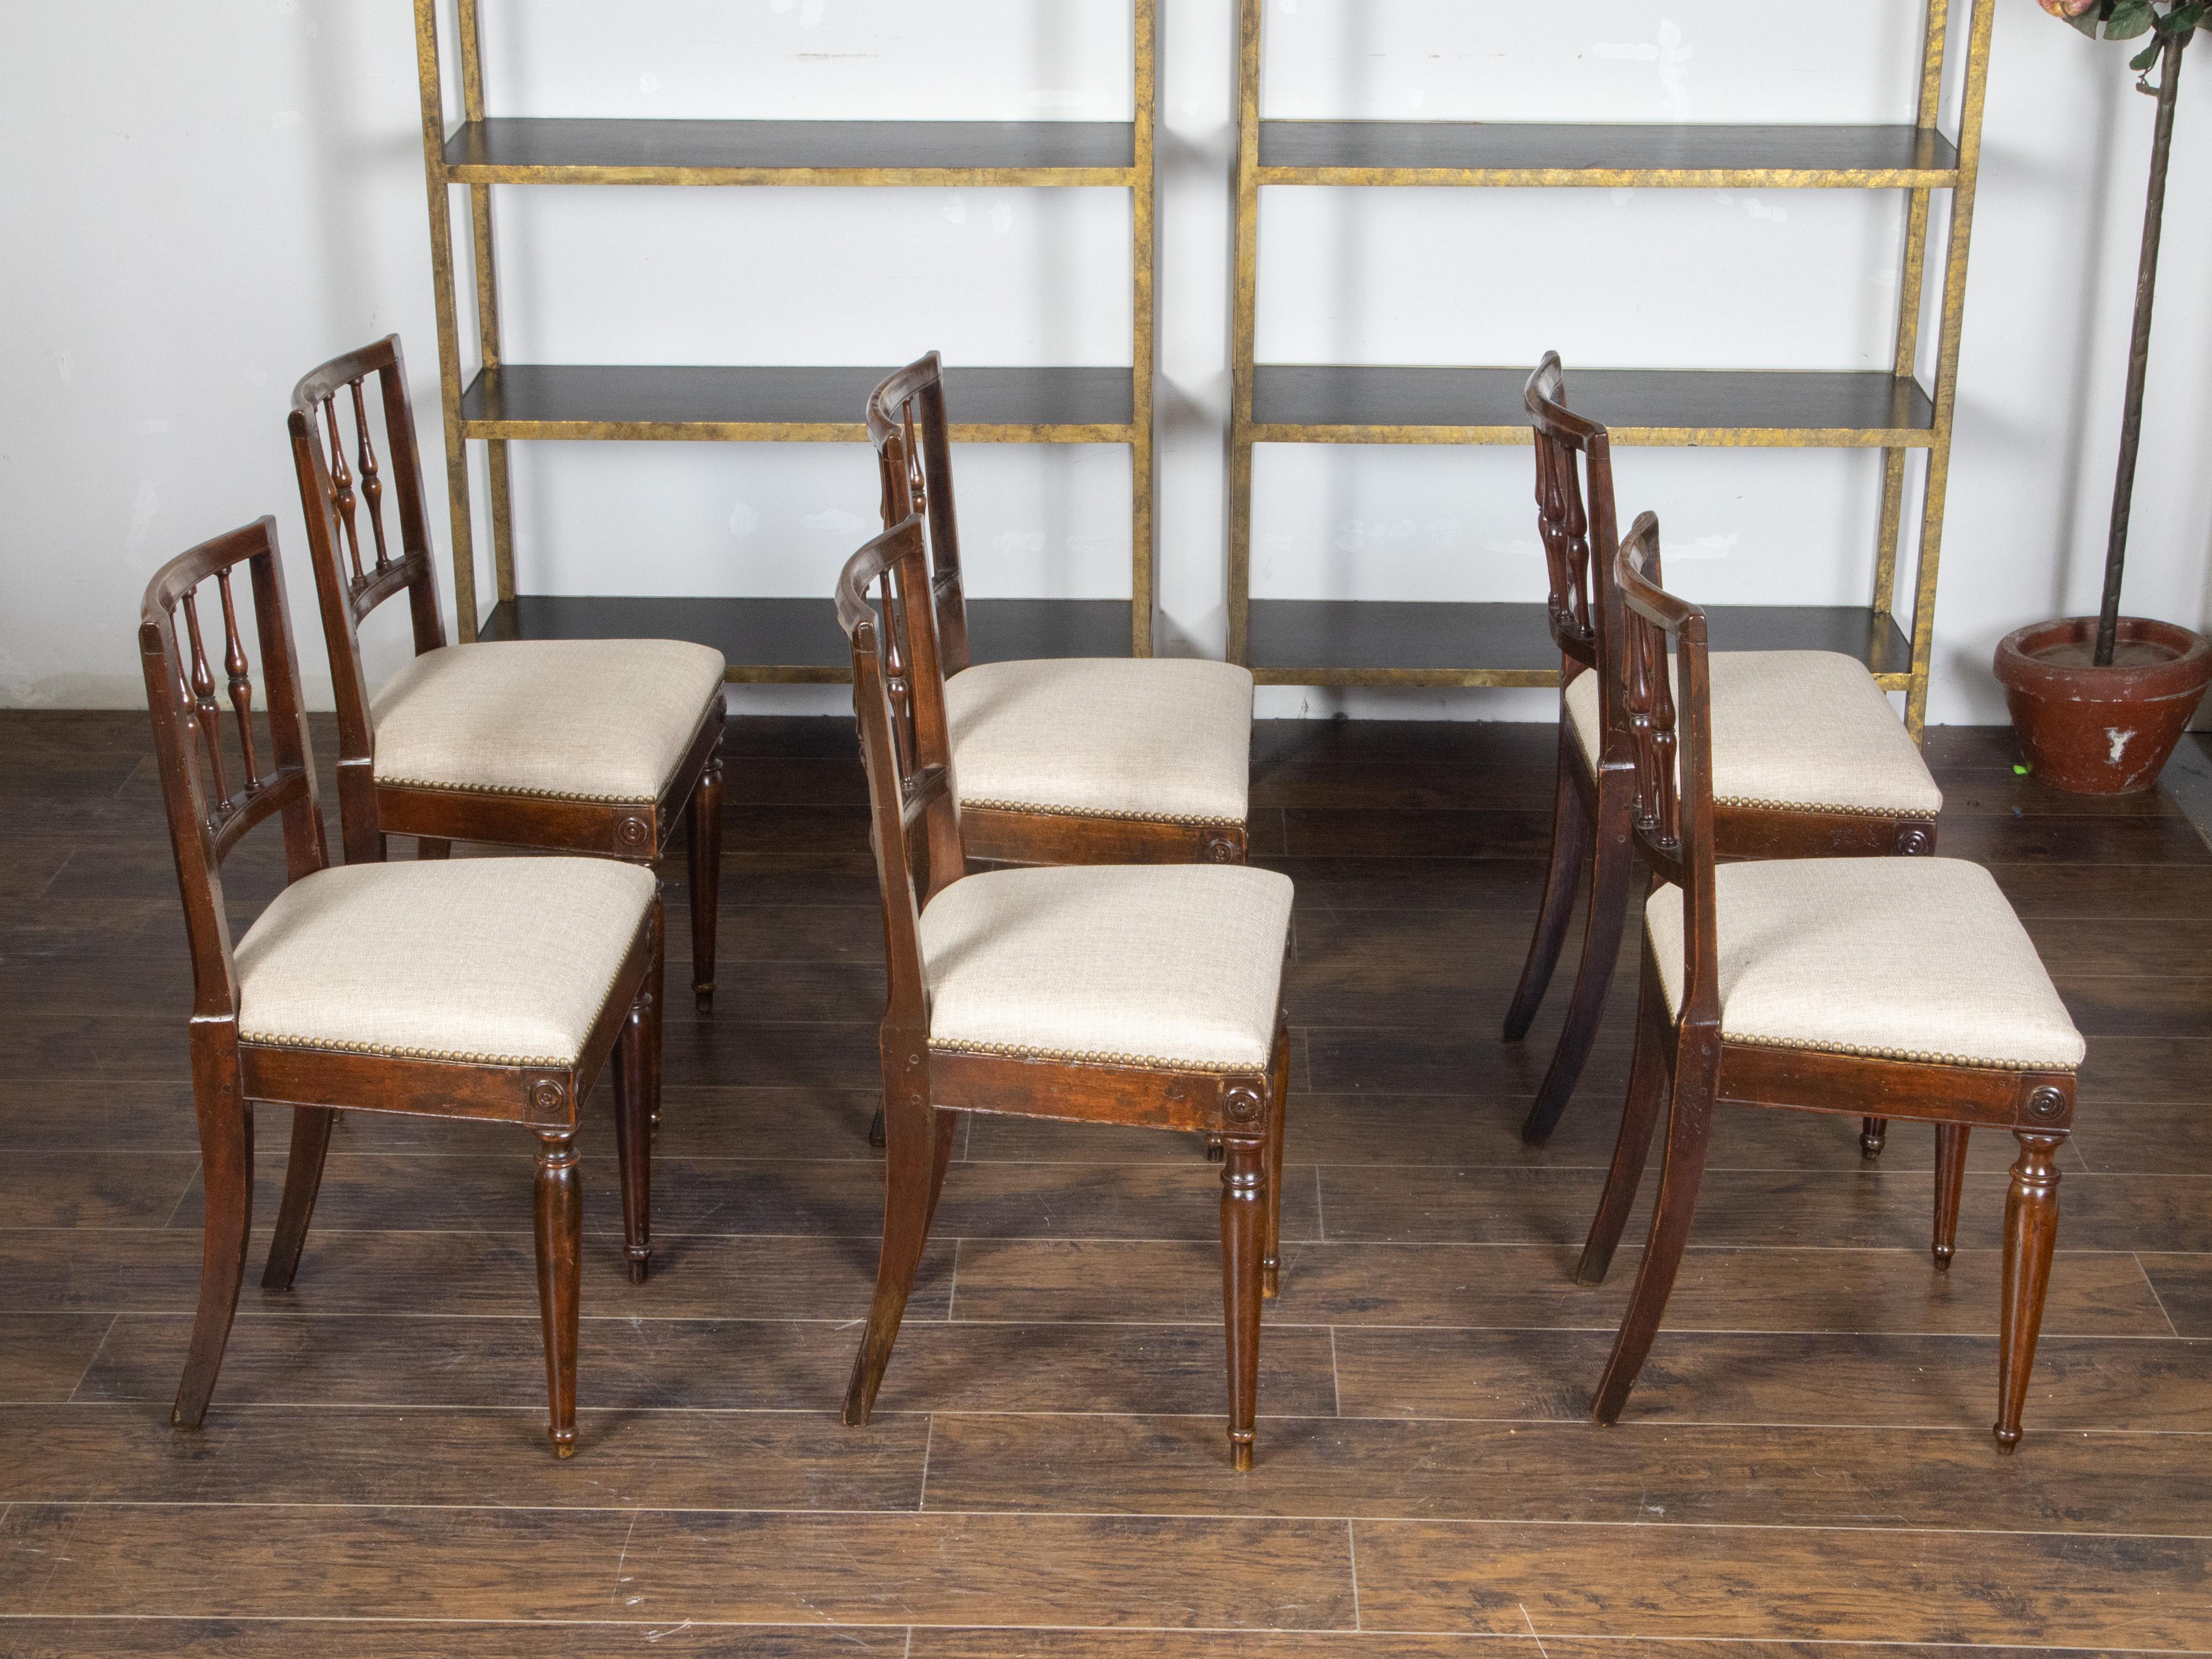 Set of Six Italian 1800s Walnut Dining Room Chairs with Spindle Shaped Backs For Sale 4